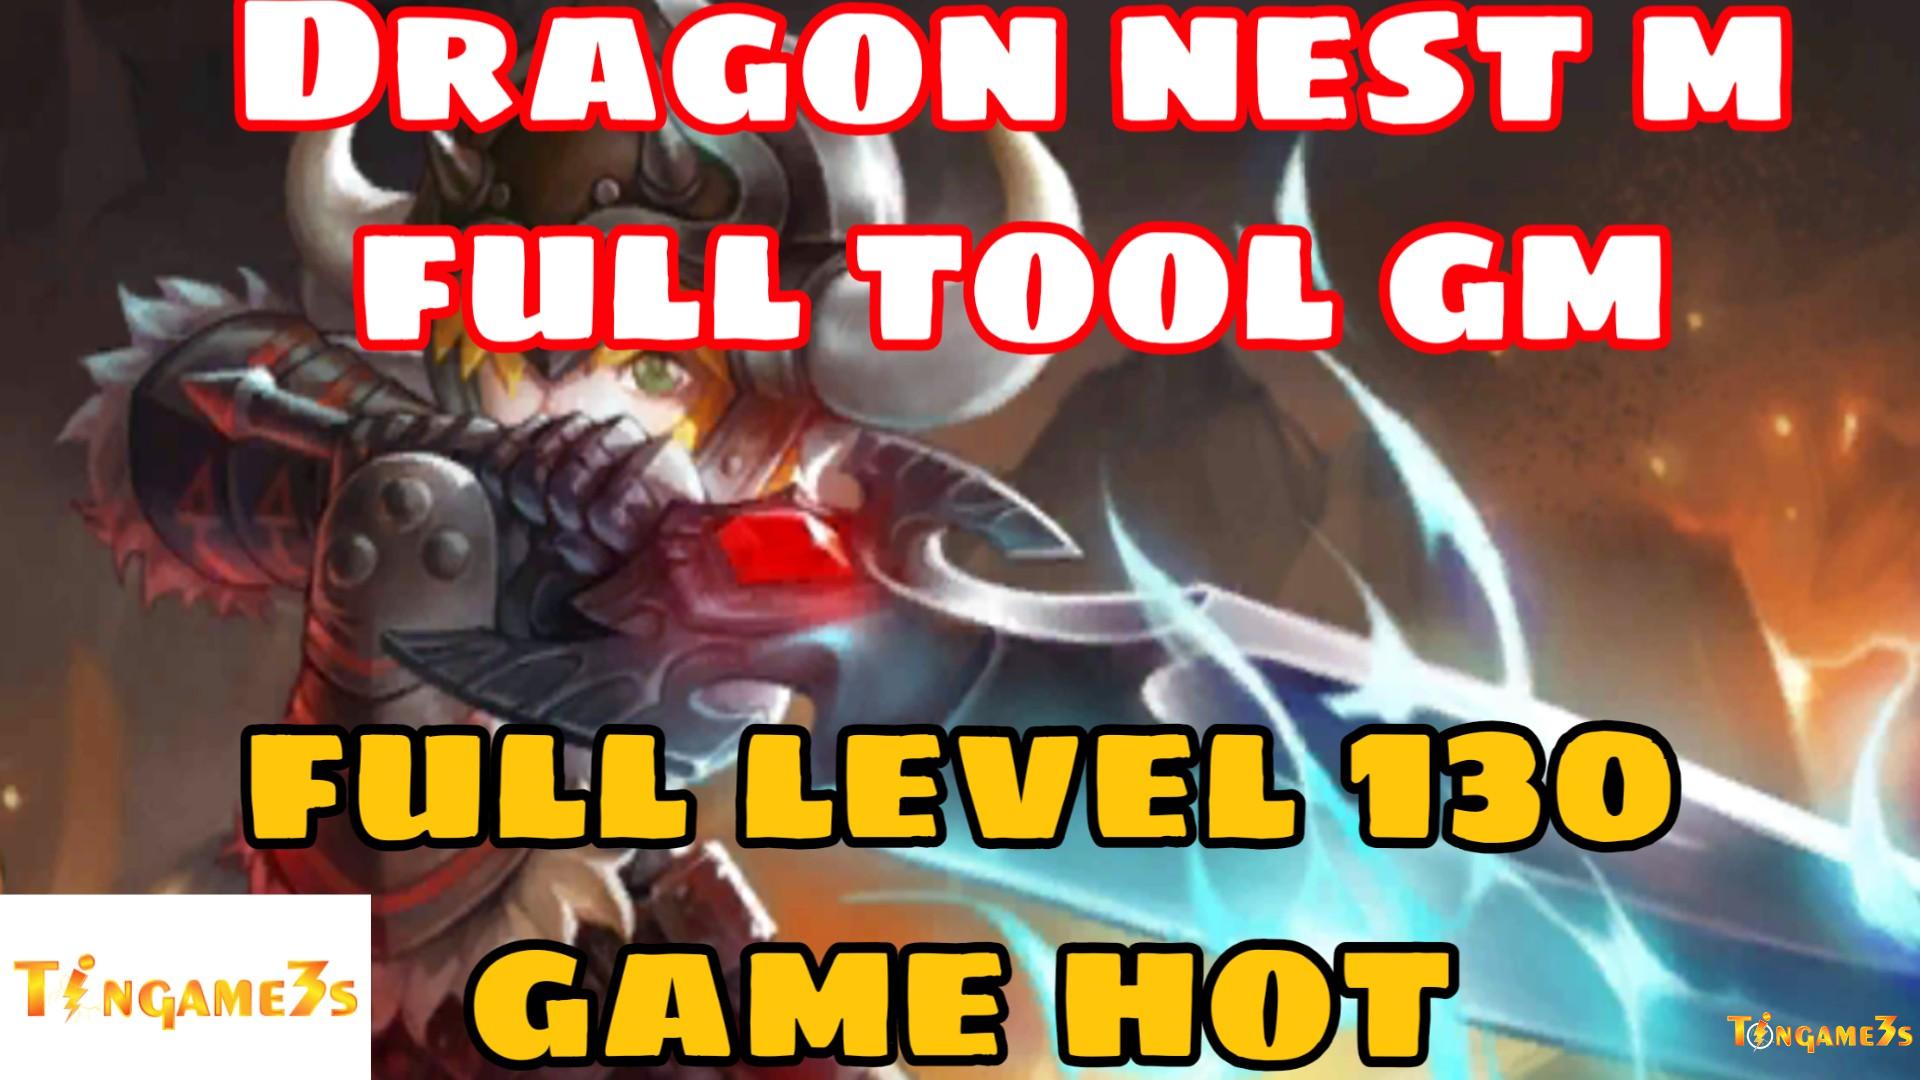 Game Mobile Private| Dragon Nest M Free Full Tool GM 2020| Full Lv 130| APK| Game Private 2020